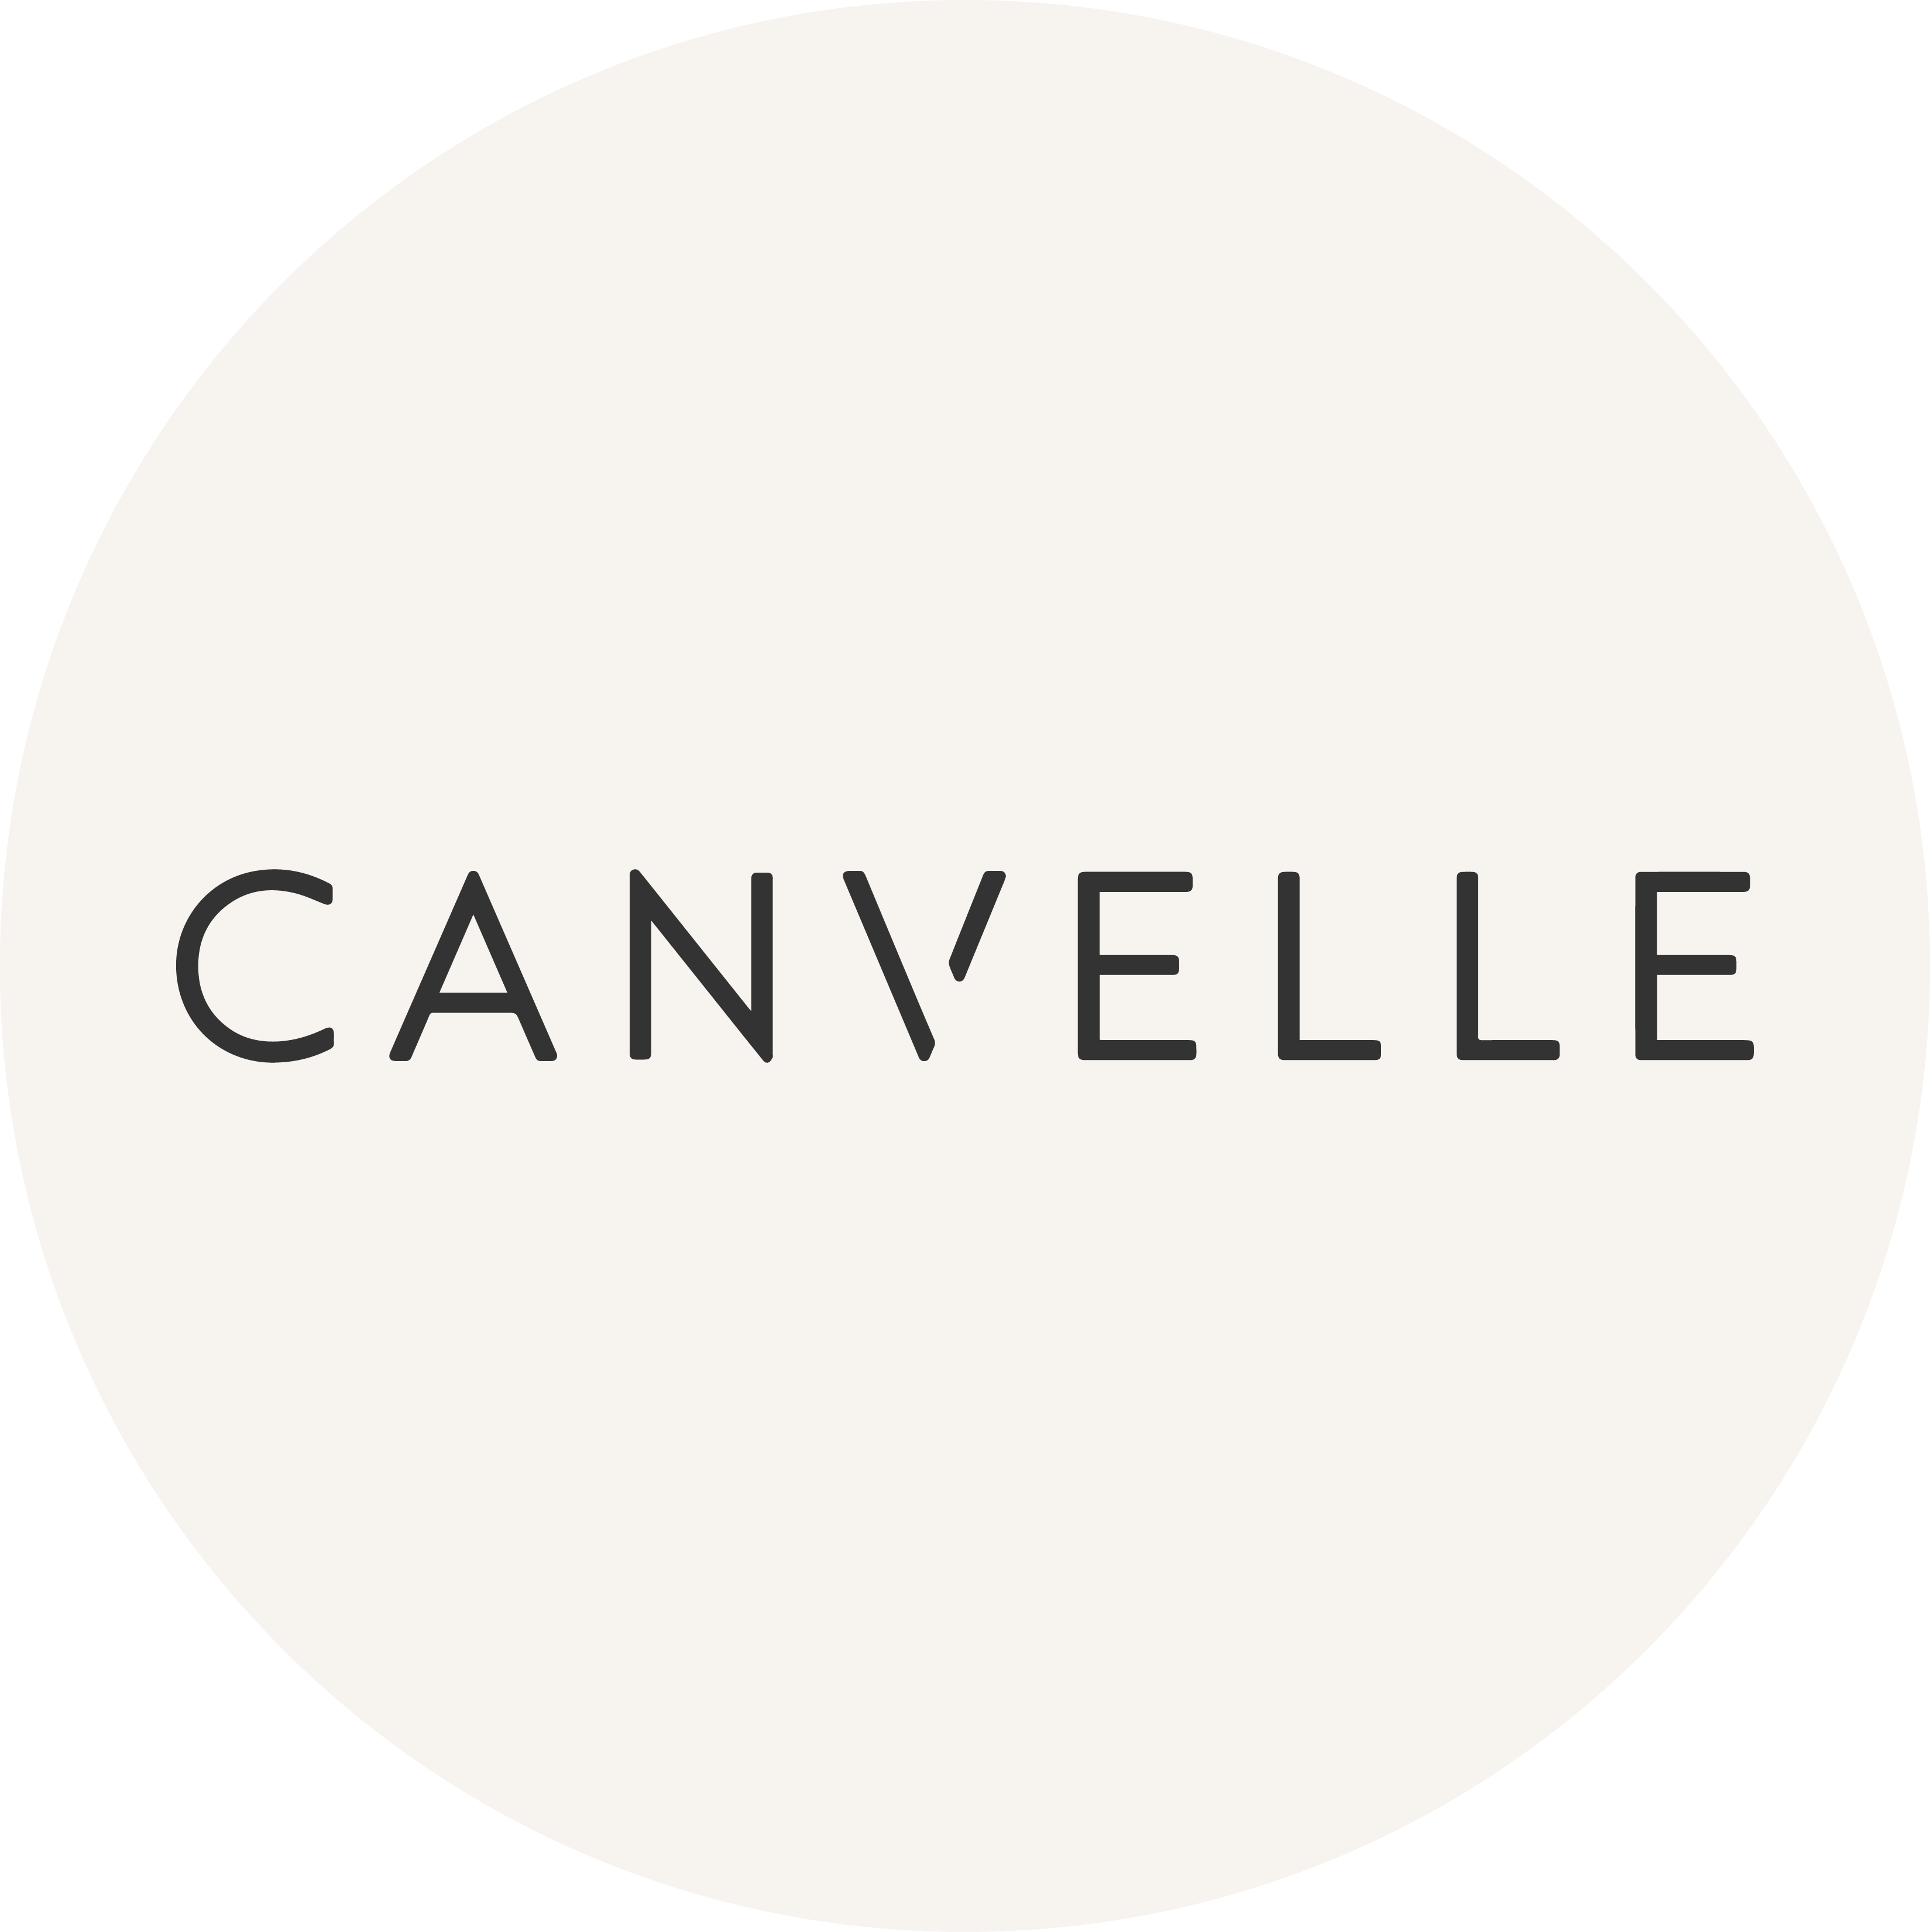 Canvelle